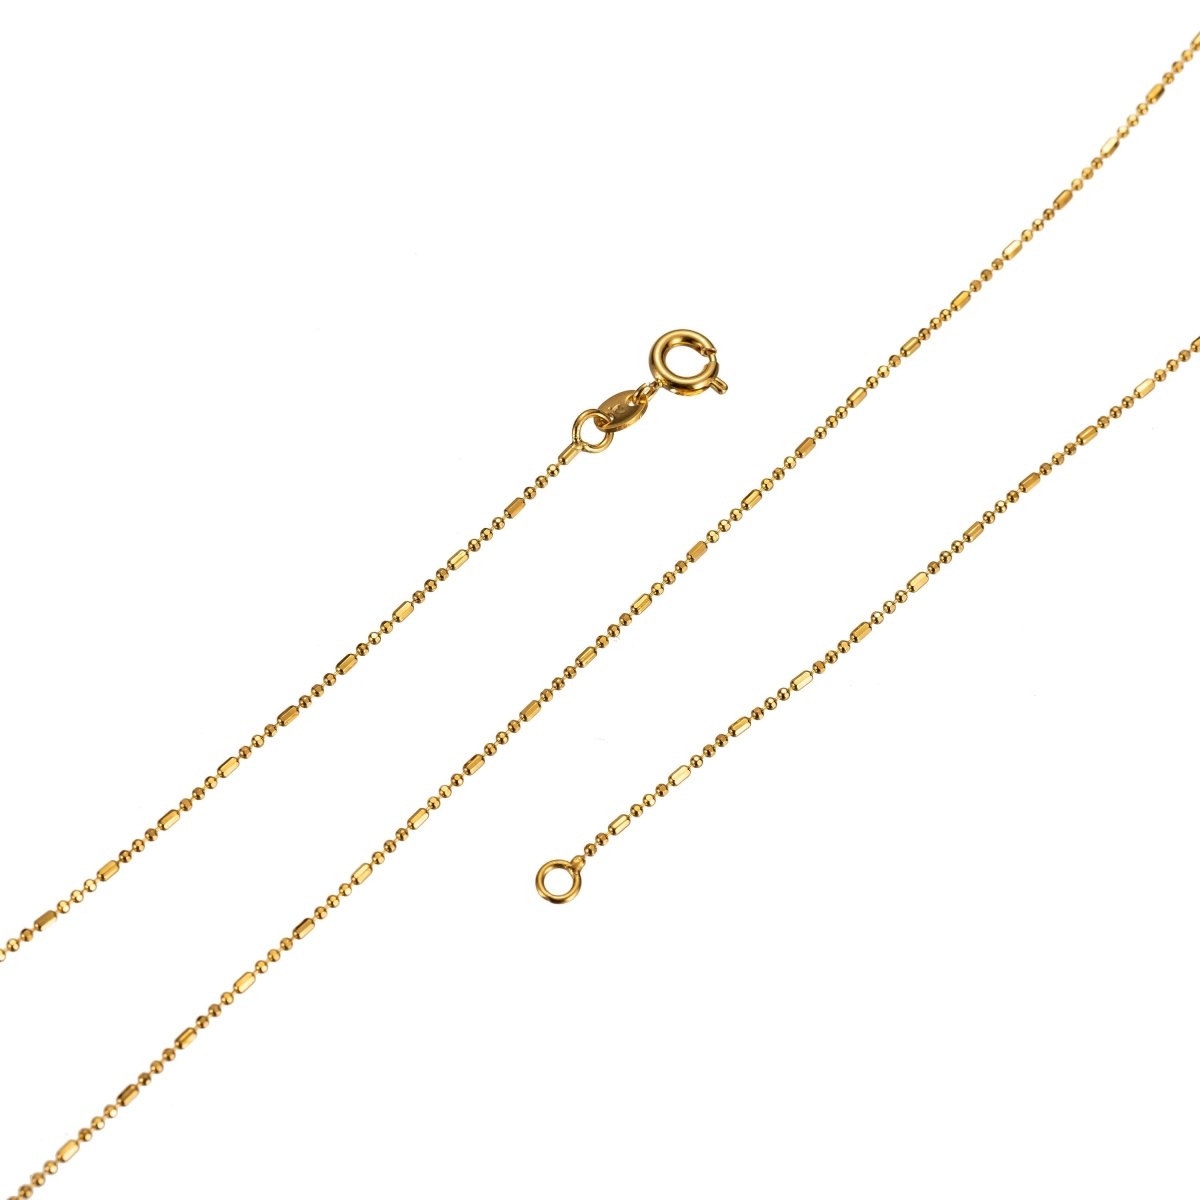 Dainty 24K Gold Filled 1mm Bead Chain Necklace in 18 inch Length Finished Ball Chain Ready to Wear with Spring Clasp Chain Replacement | CN-444 Clearance Pricing - DLUXCA